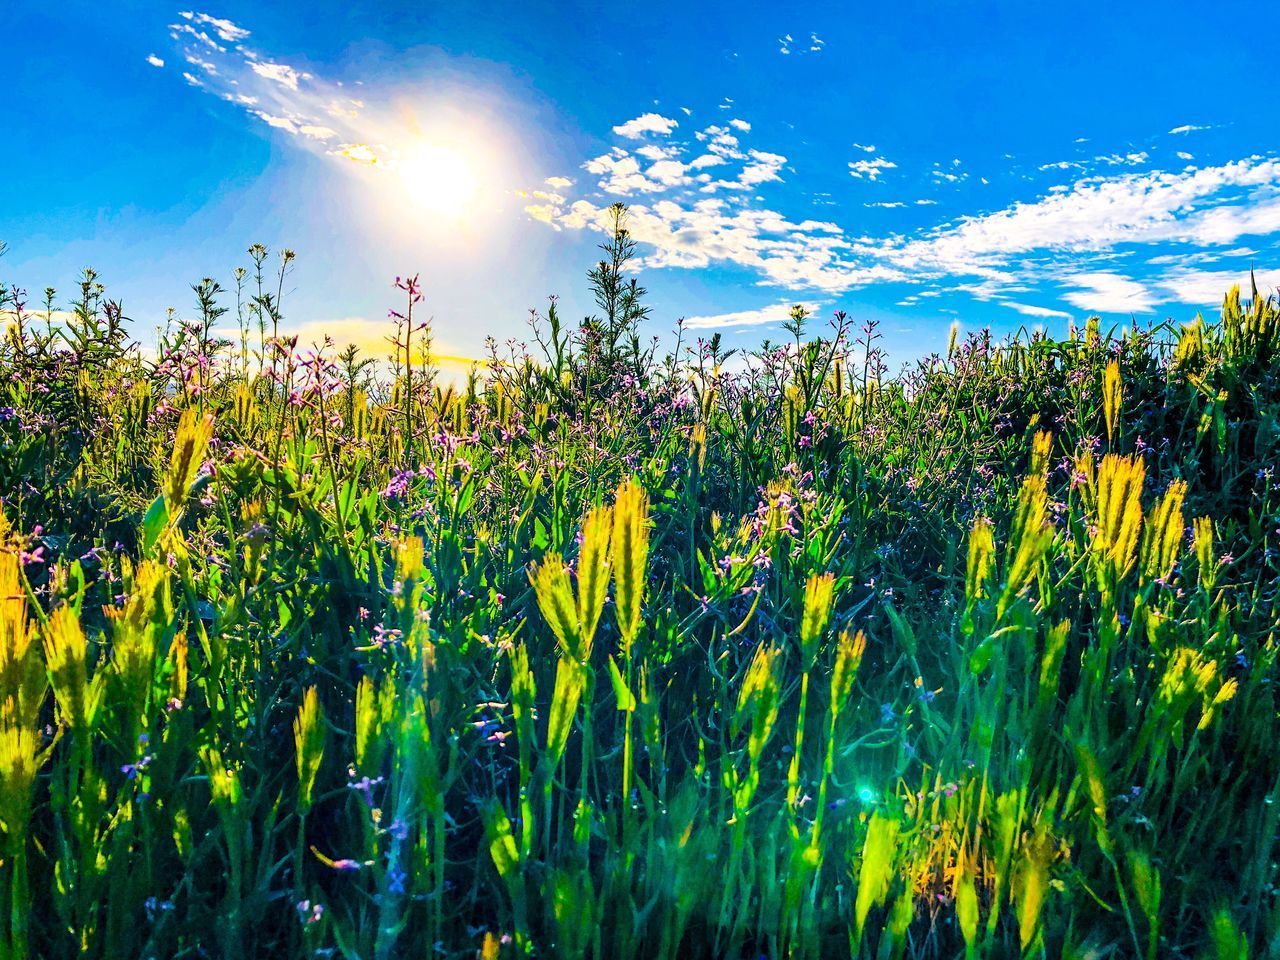 PLANTS GROWING ON FIELD AGAINST BRIGHT SKY